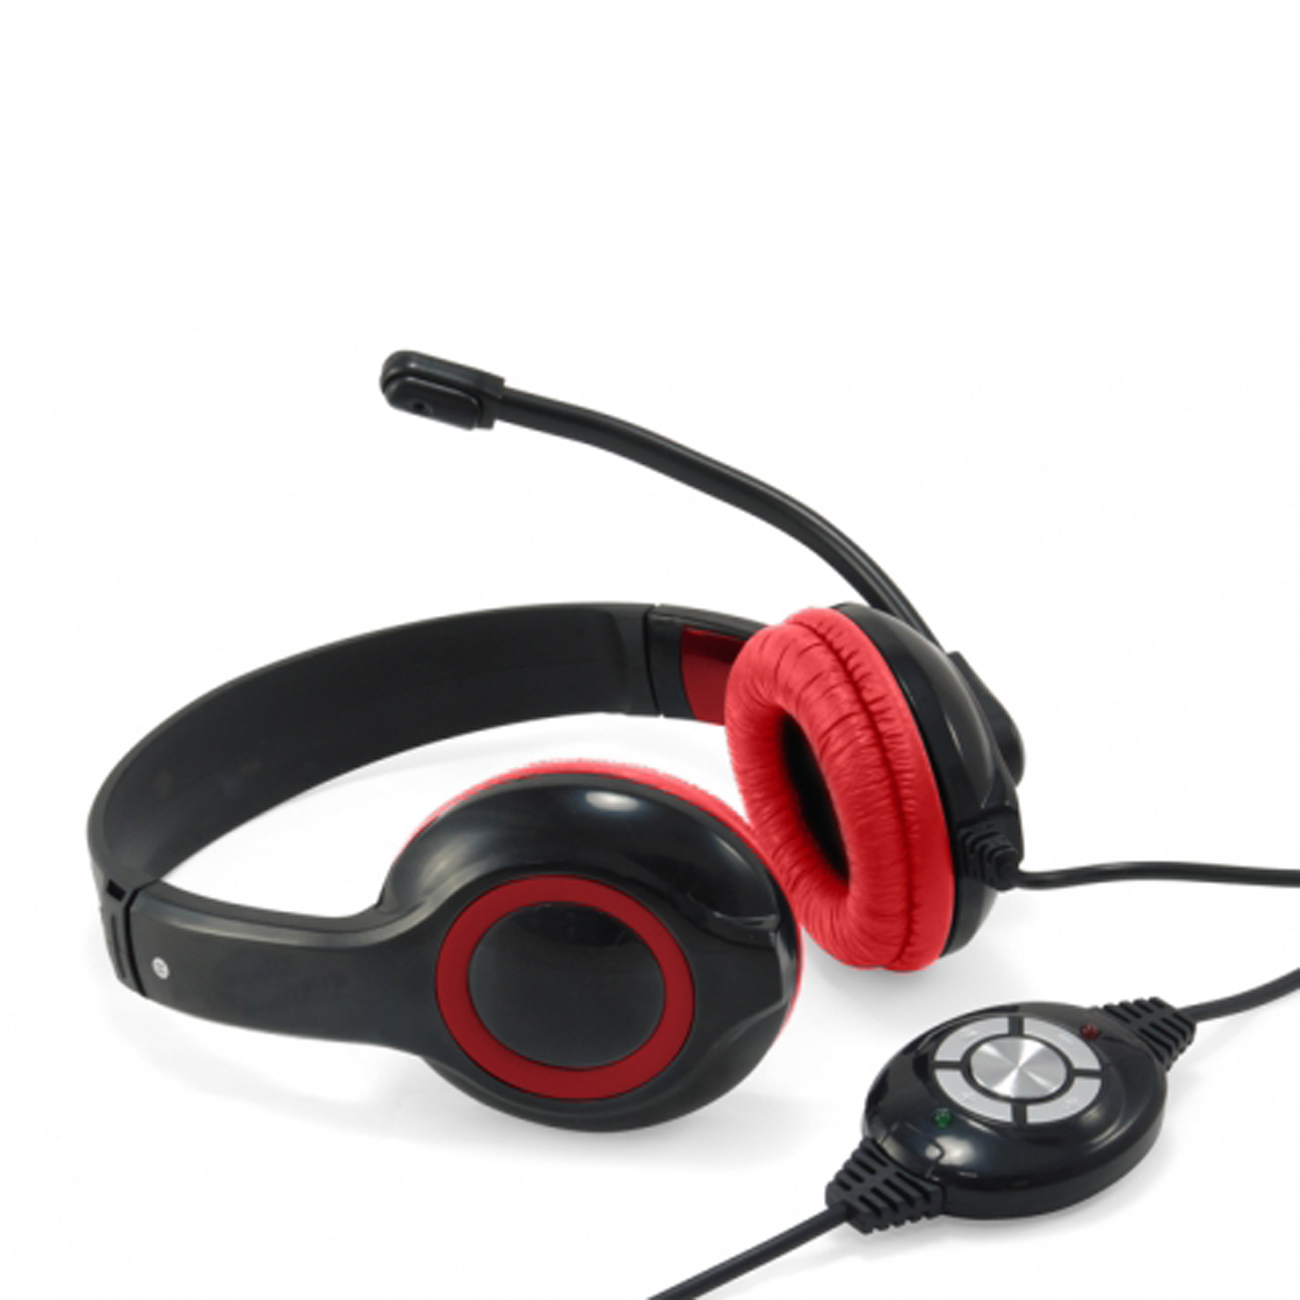 CONCEPTRONIC Headset USB 2m Kabel,Mikro,int.Bed.Stereo rt - CCHATSTARU2R